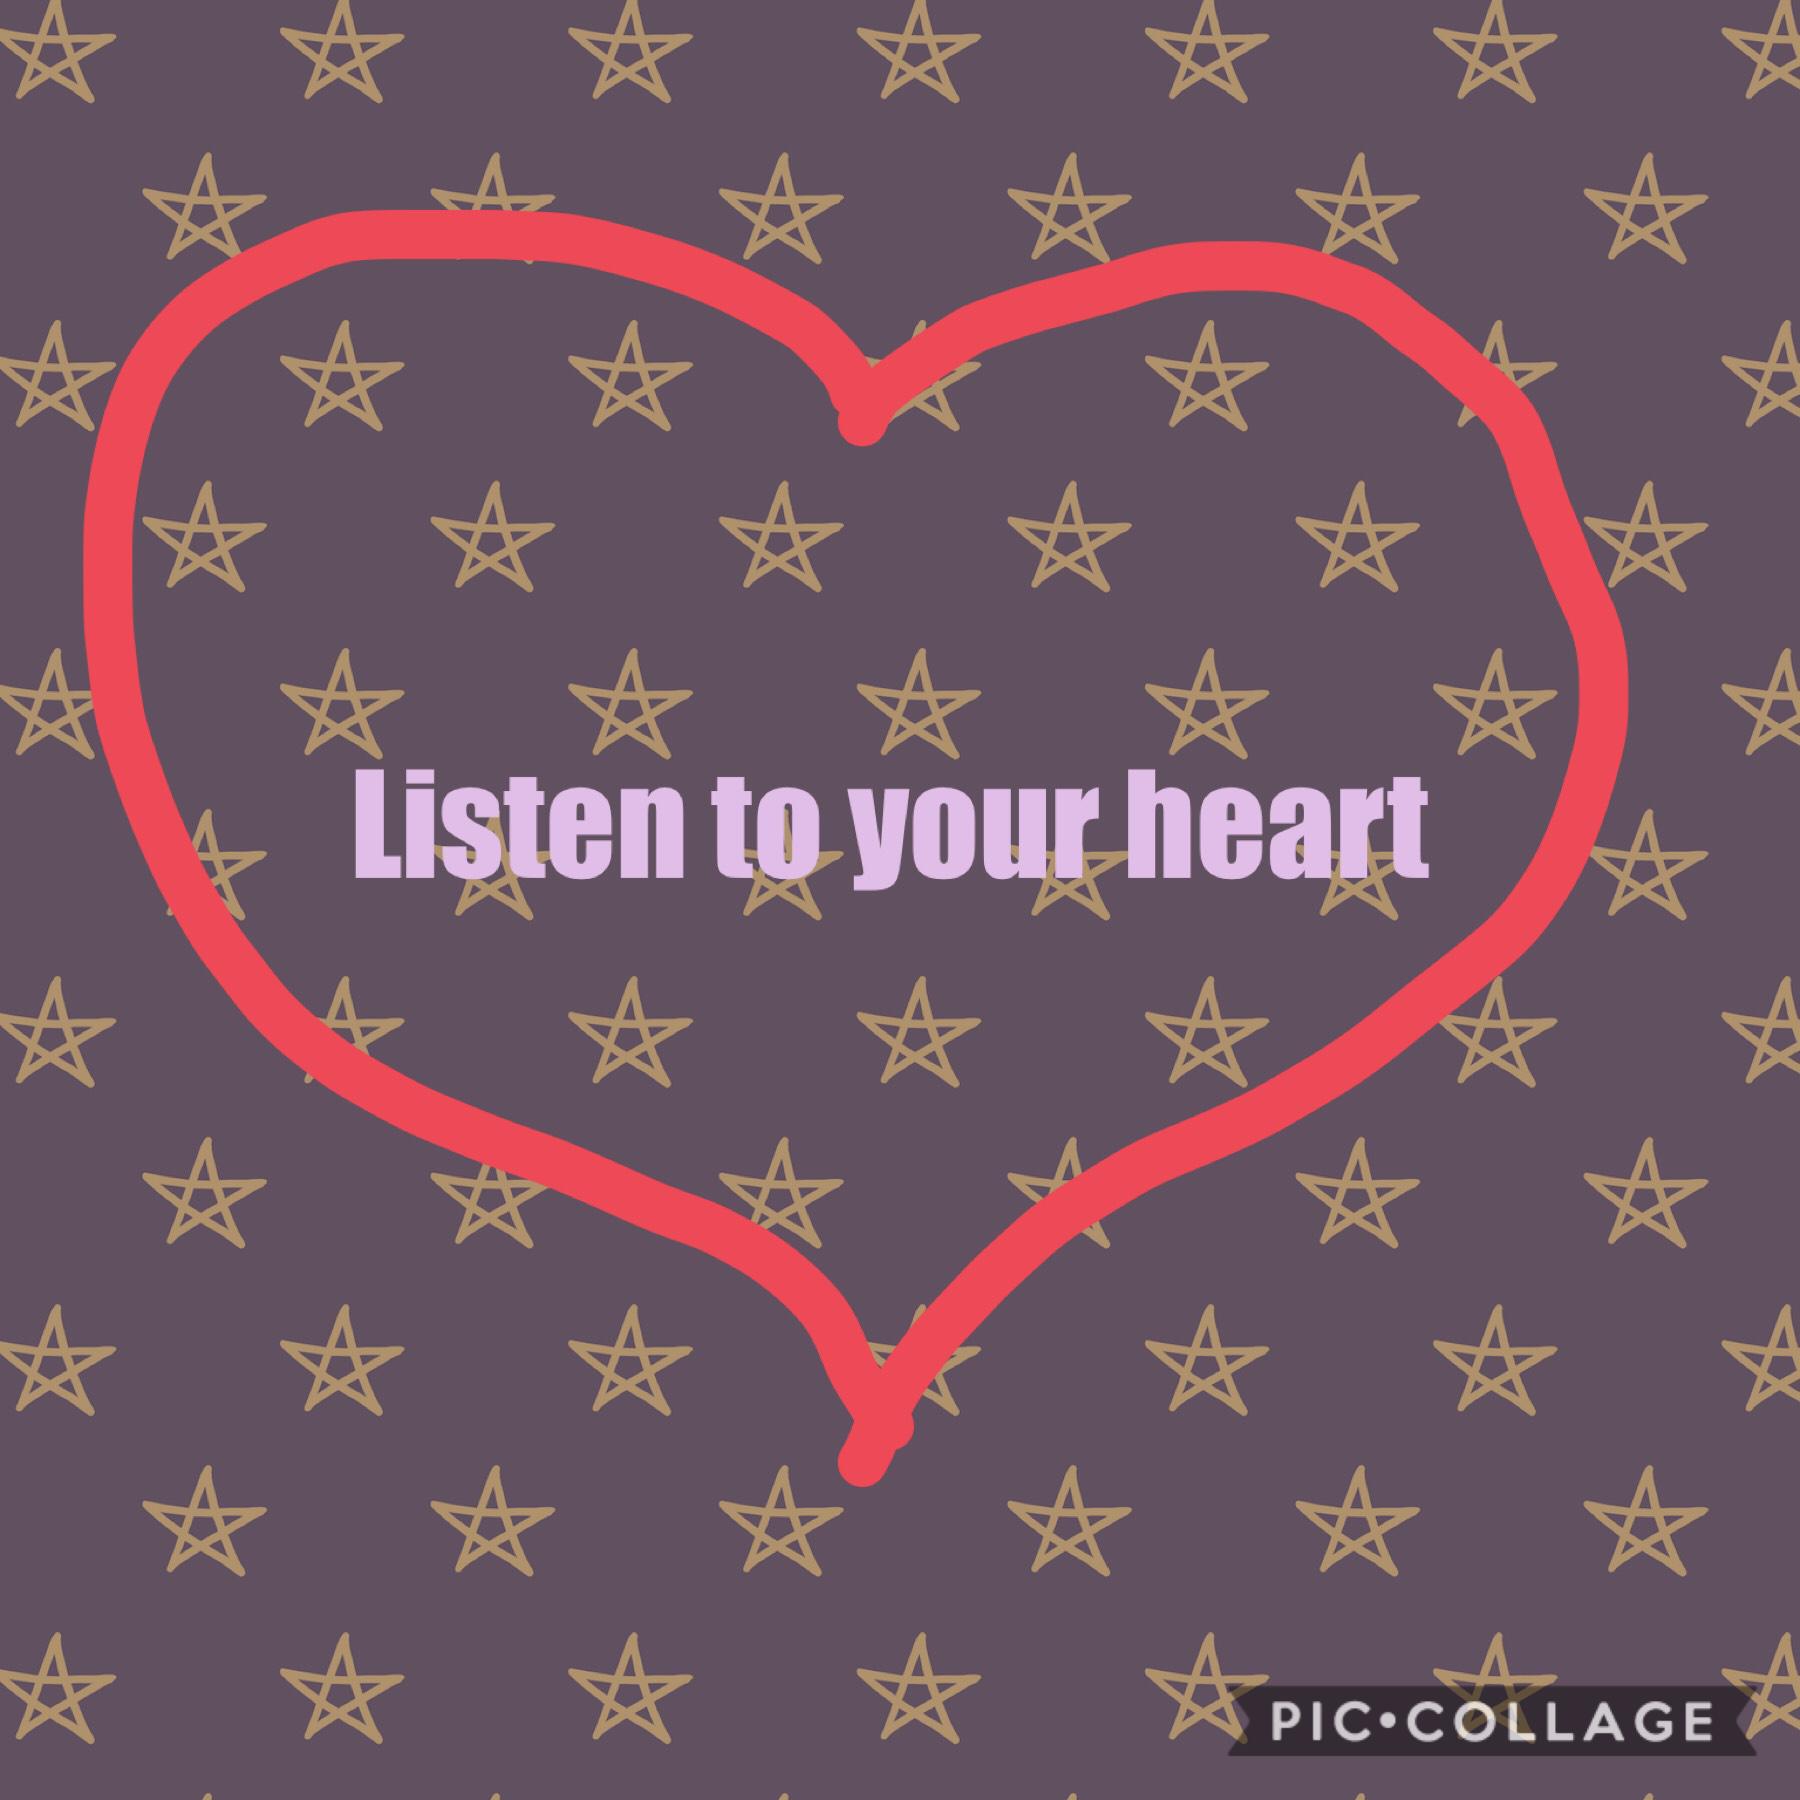 Always listen to your heart no matter what